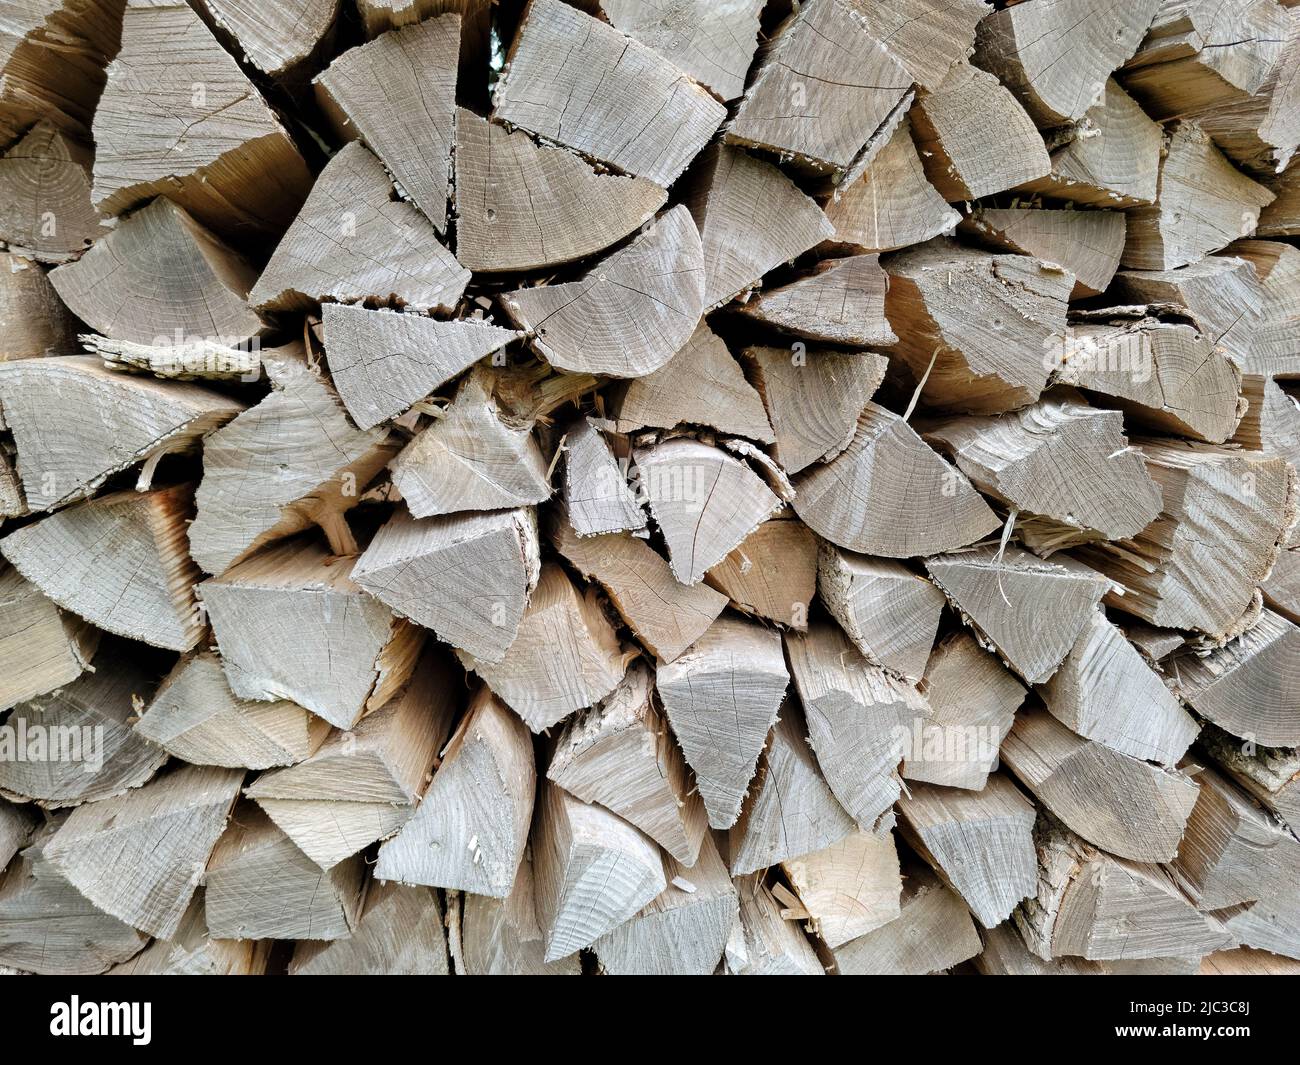 Stacked firewood for the winter season Stock Photo